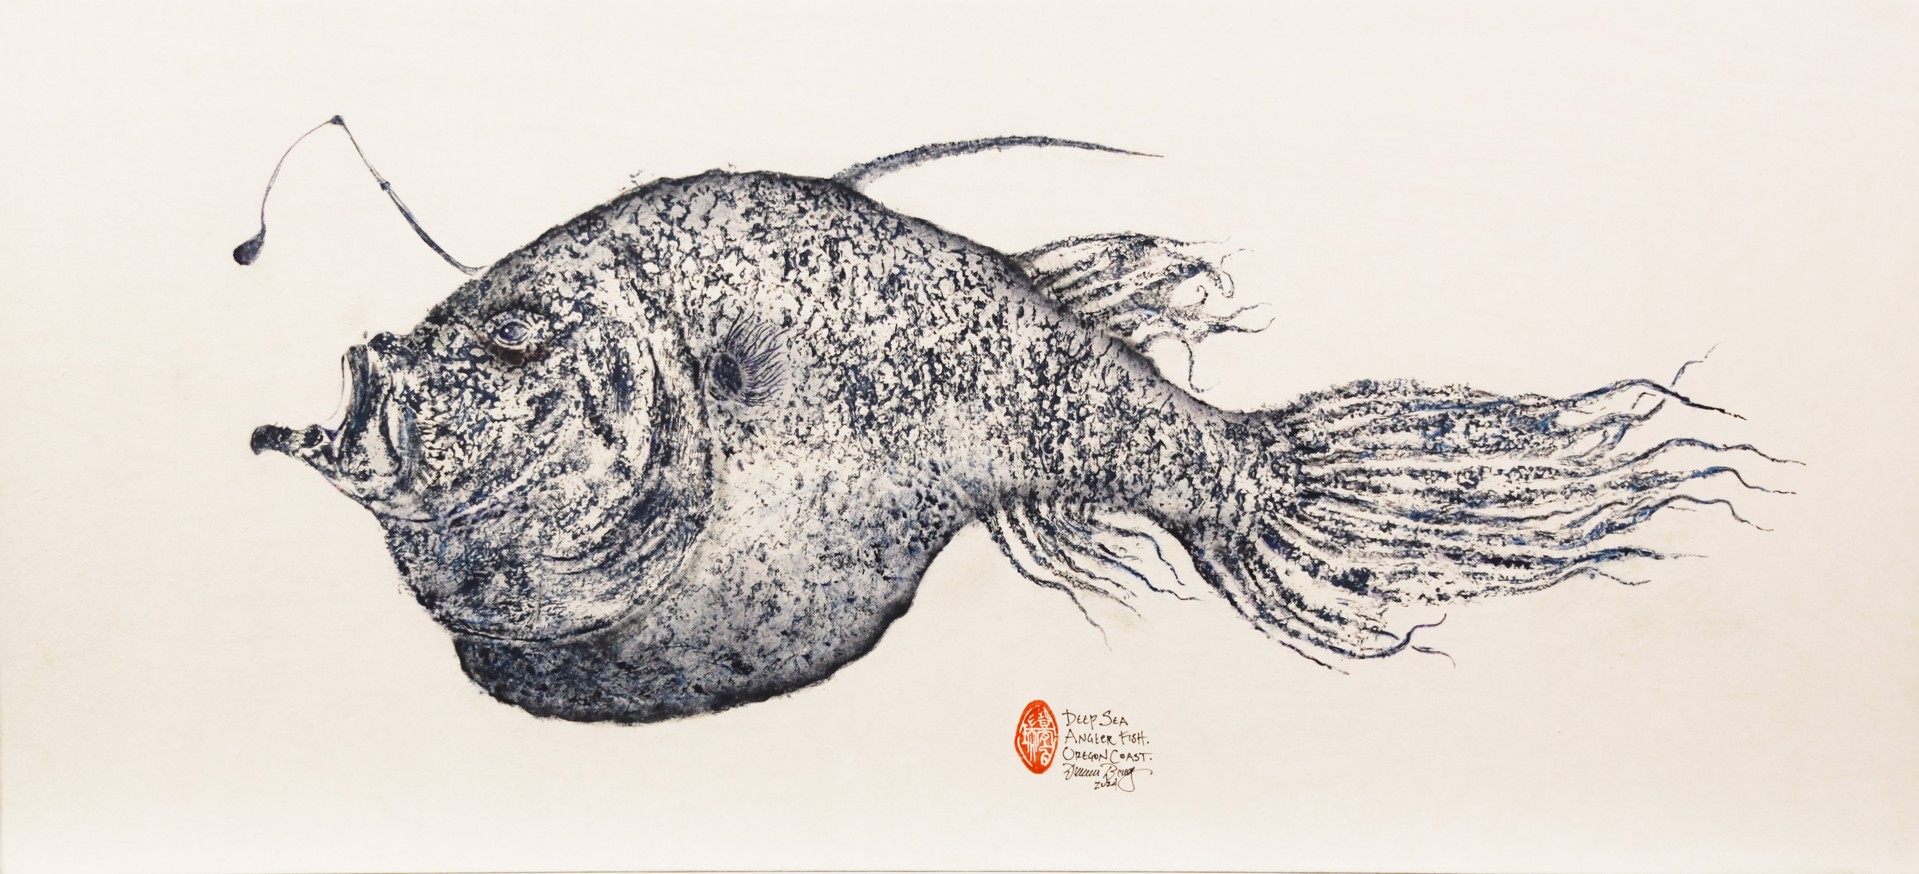 Lanternfish by Duncan Berry